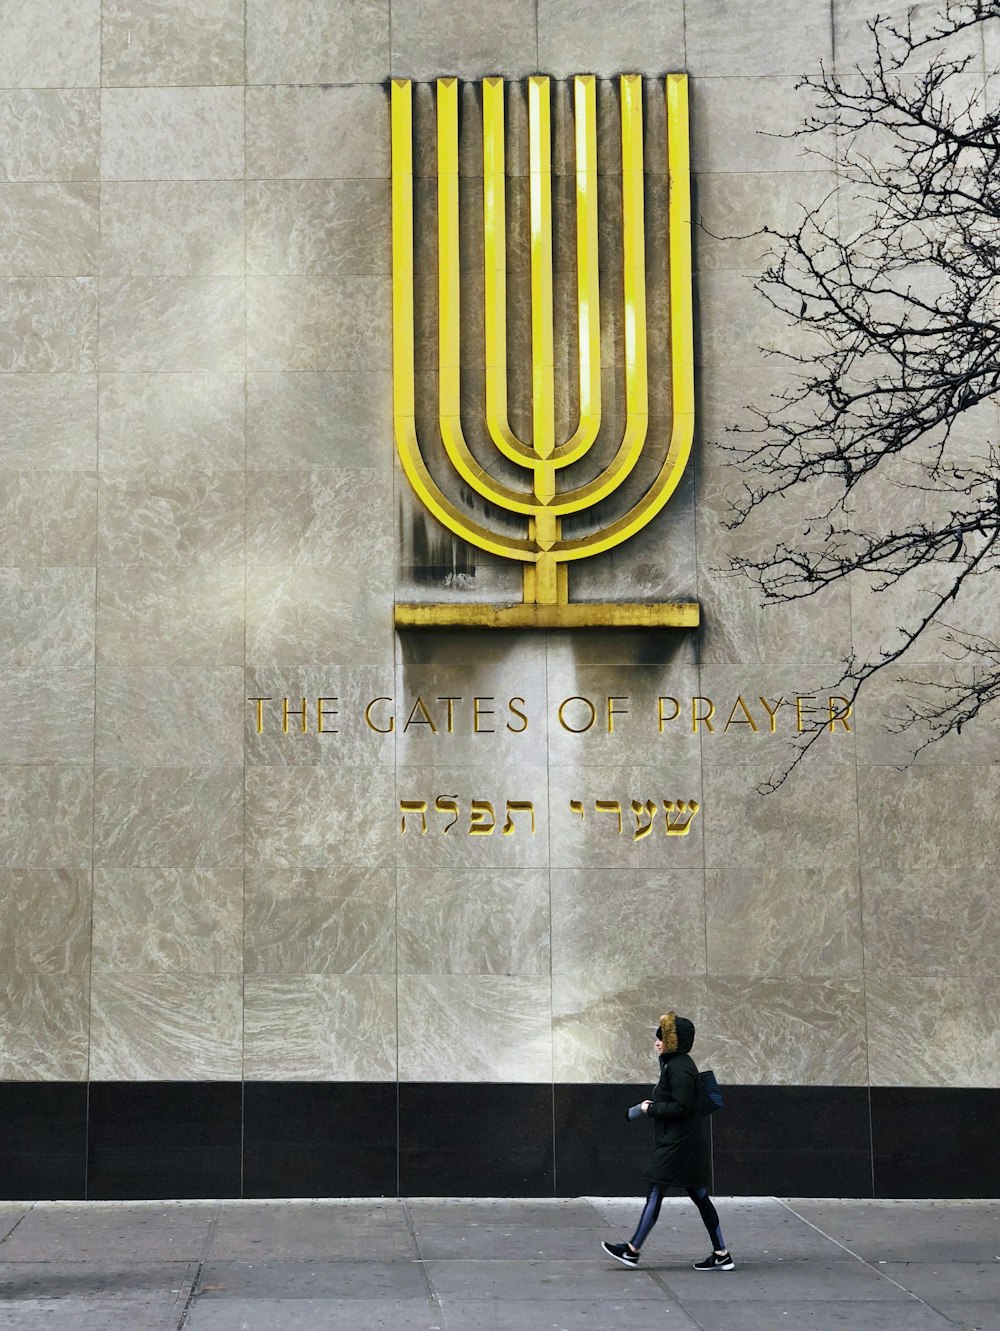 a man walking past a building with a large menorah on it